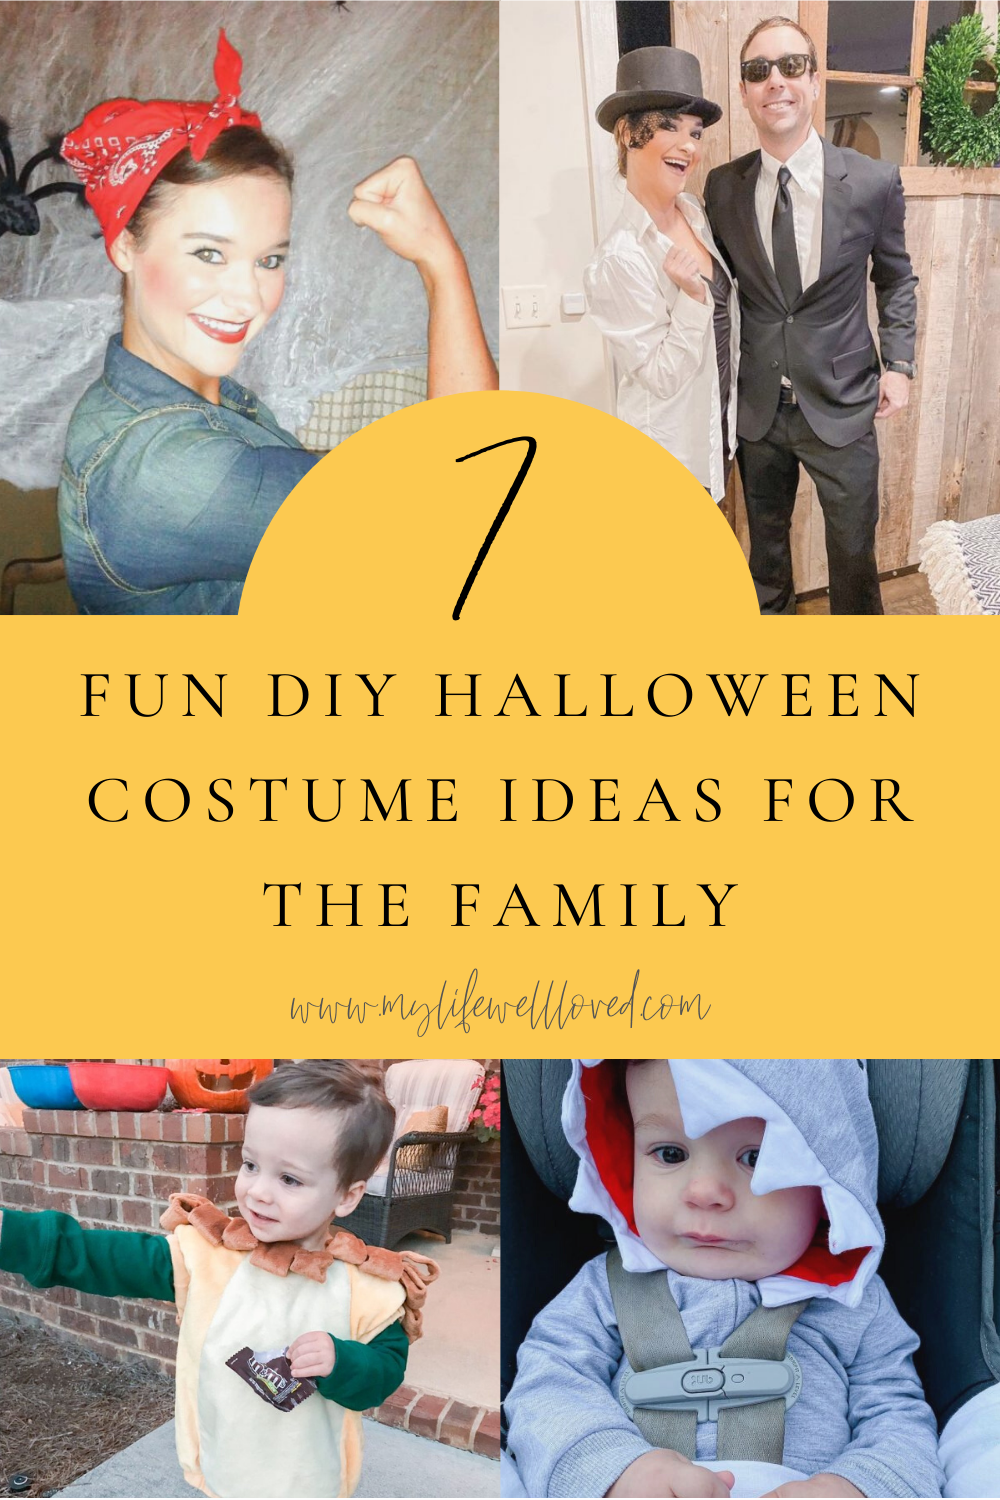 10+ DIY Halloween Costume Ideas For Kids and Adults pic